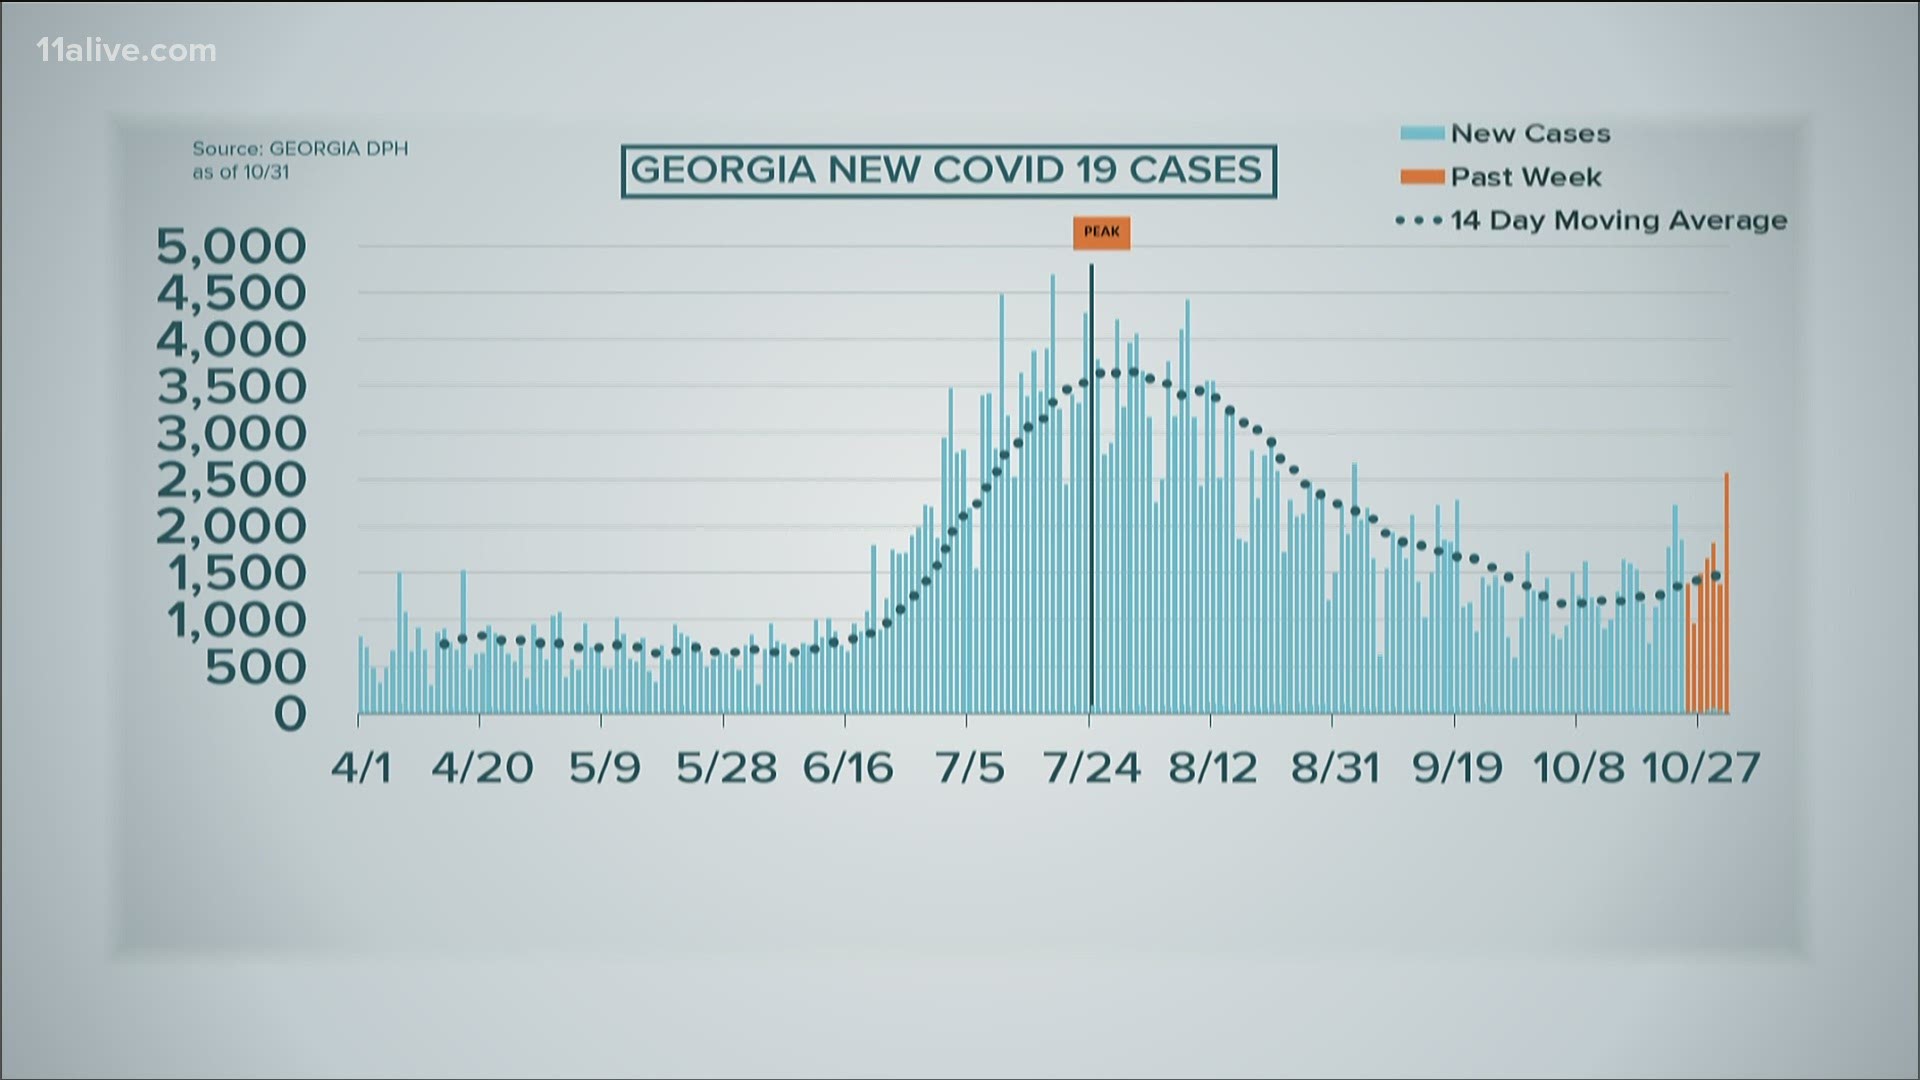 There were 2,500 new cases yesterday, up sharply from the 14-day average.